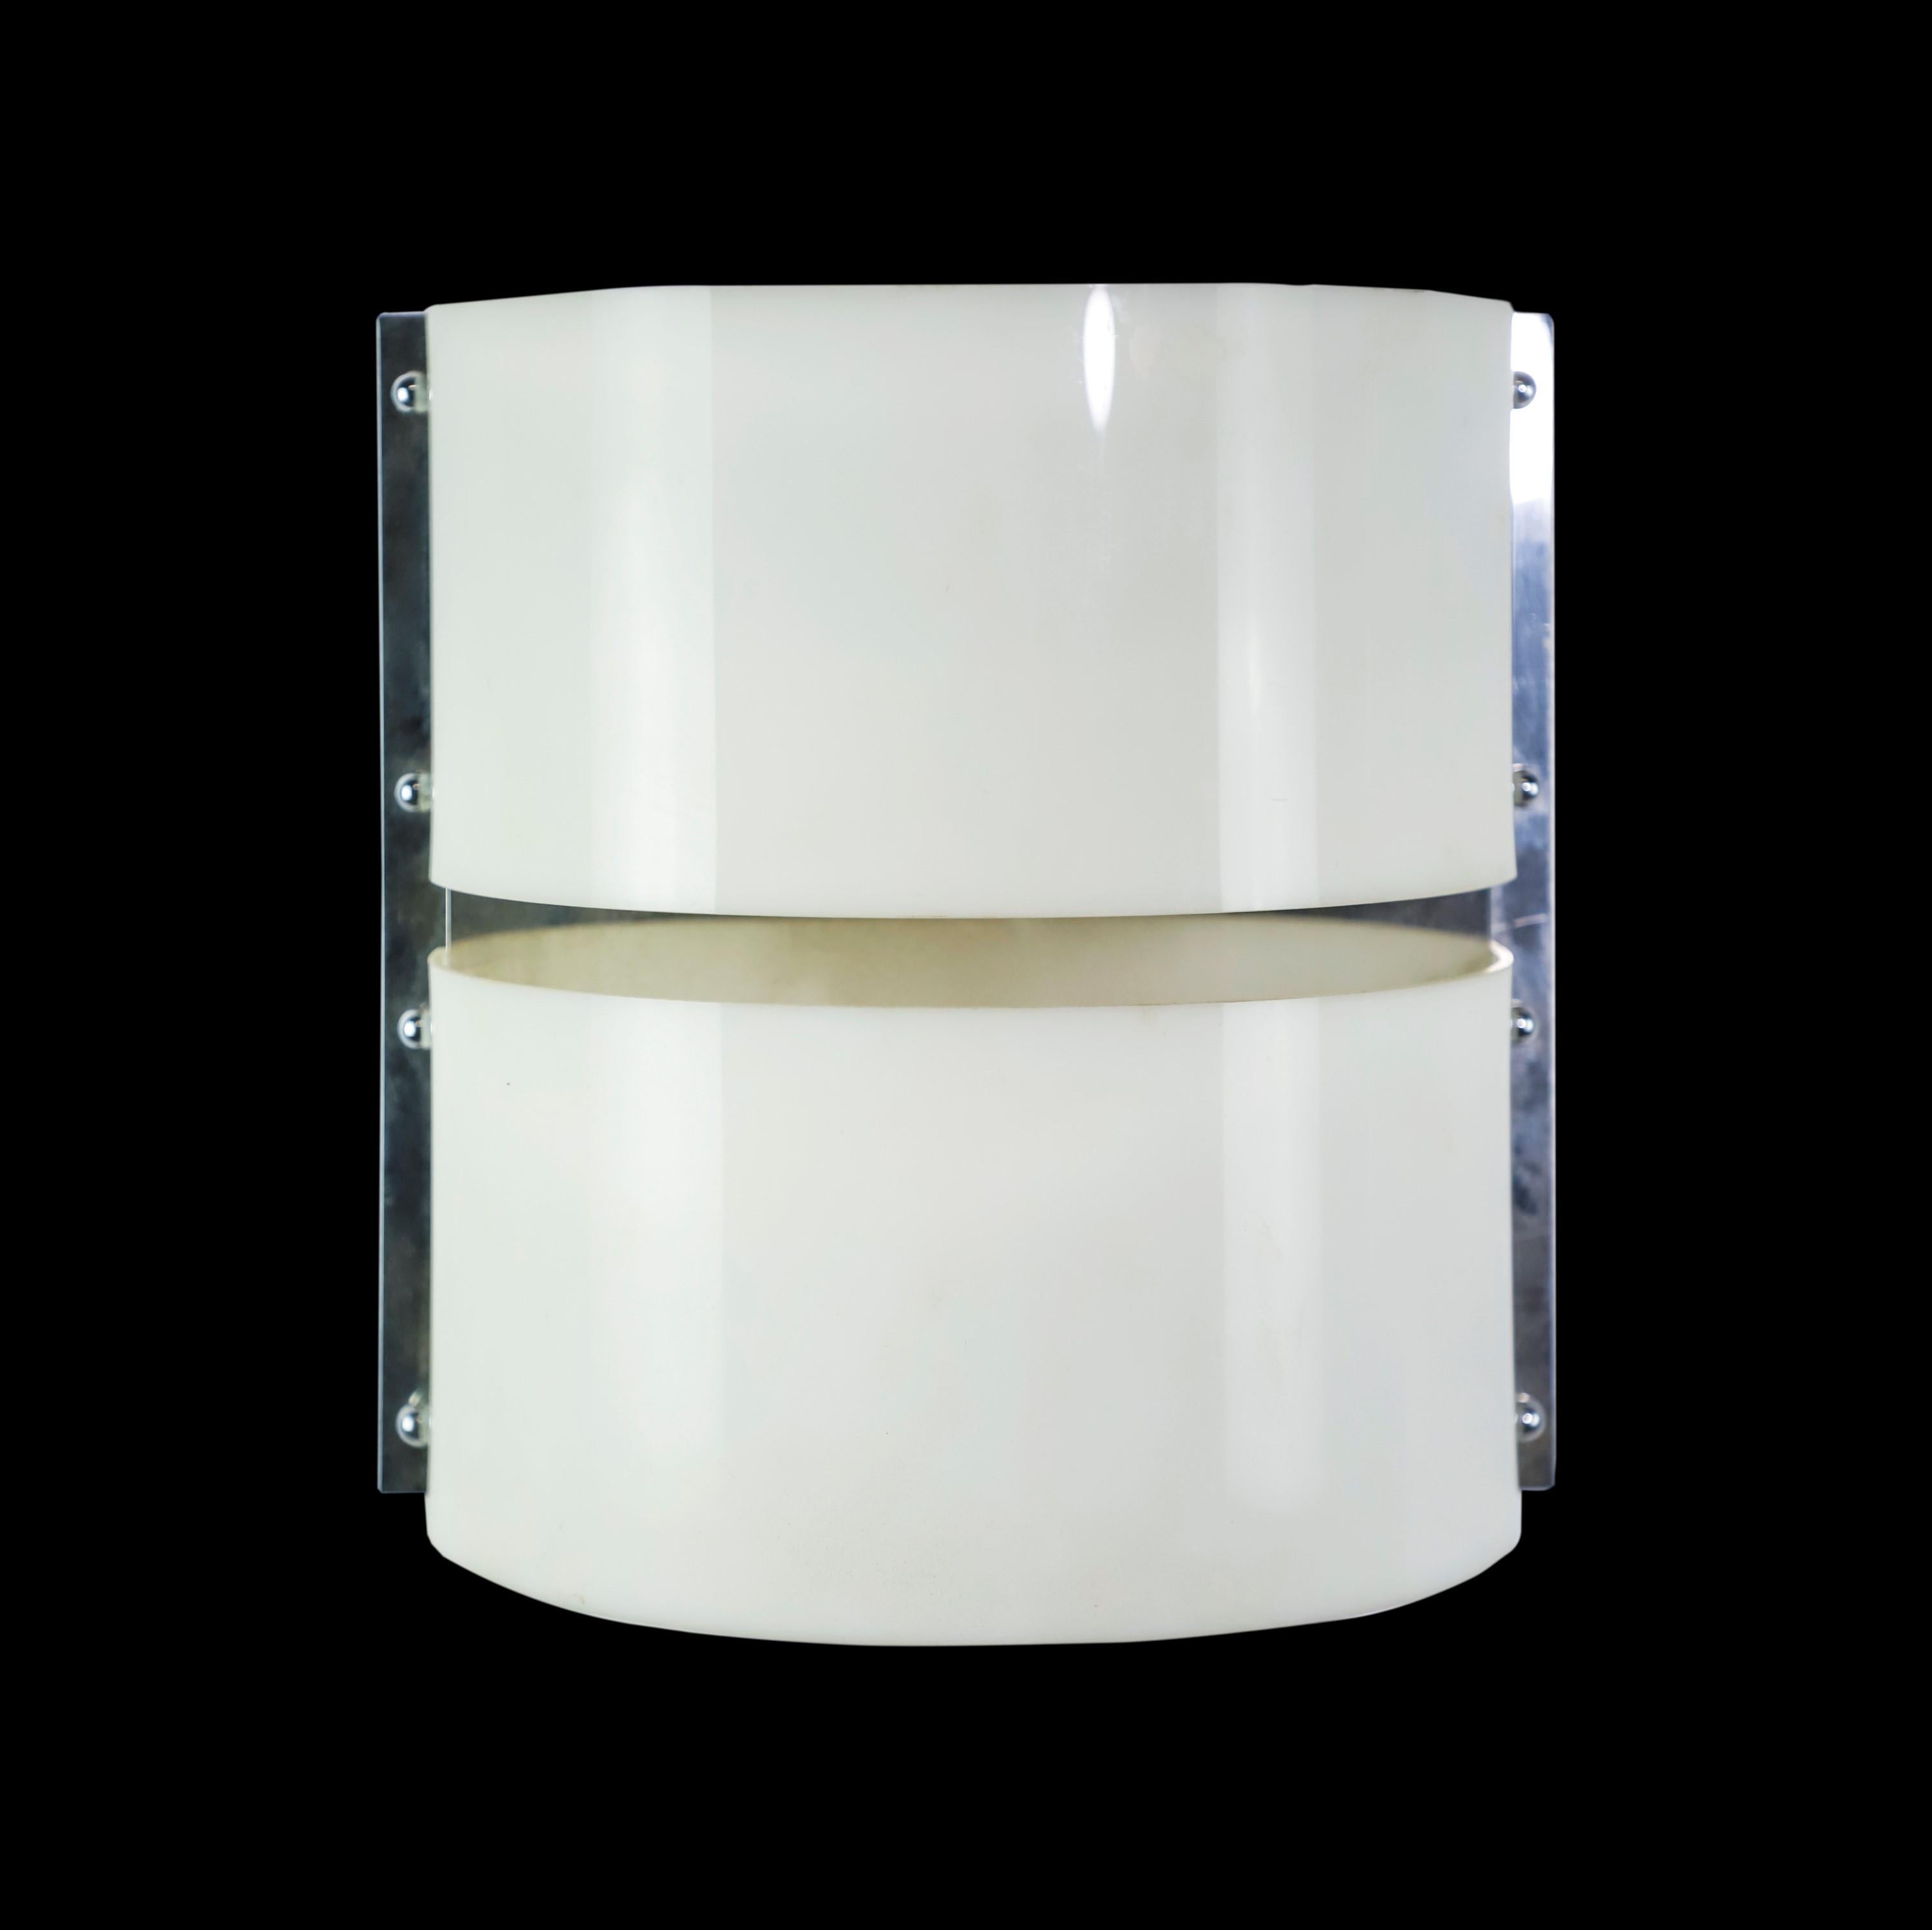 Single Mid-20th Century Italian Mid-Century Modern style wall mounted sconce. This sconce features curved Lucite shades mounted to a polished nickeled wall backplate. Has two sockets. Italian, Cleaned and restored.